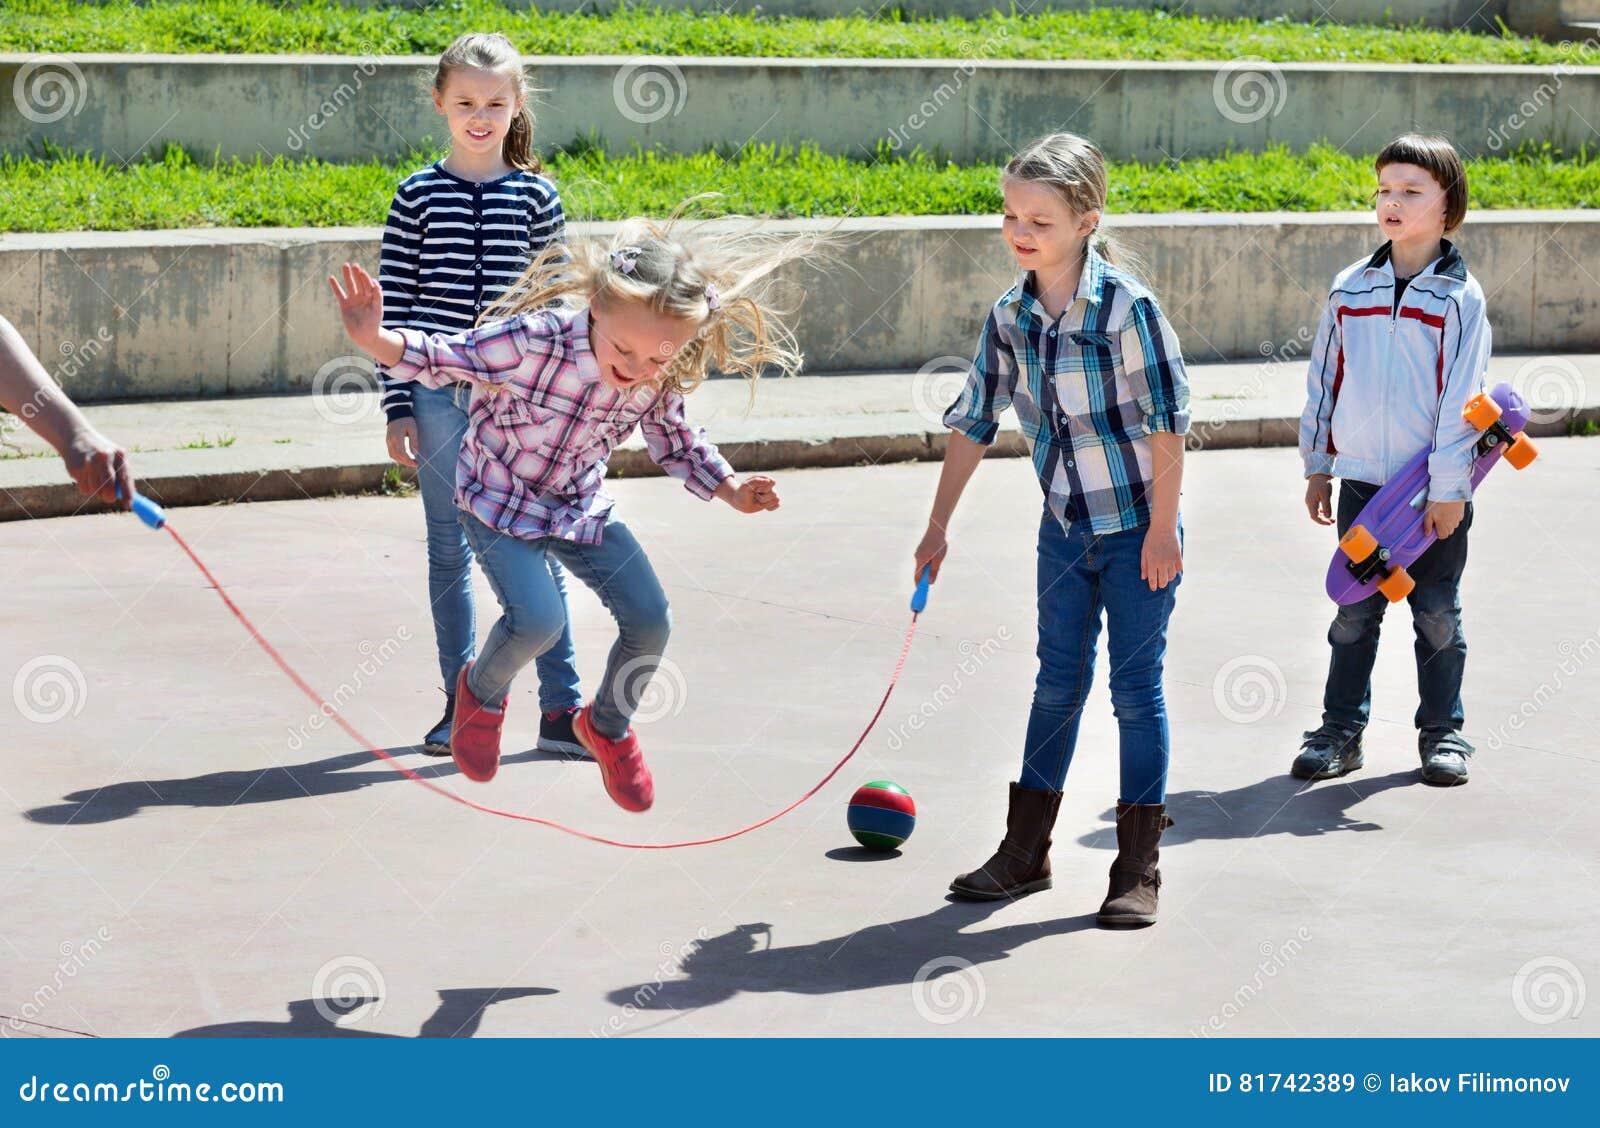 Details about   Kids Skipping Rope Children Exercise Jumping Game Fitness Activity 